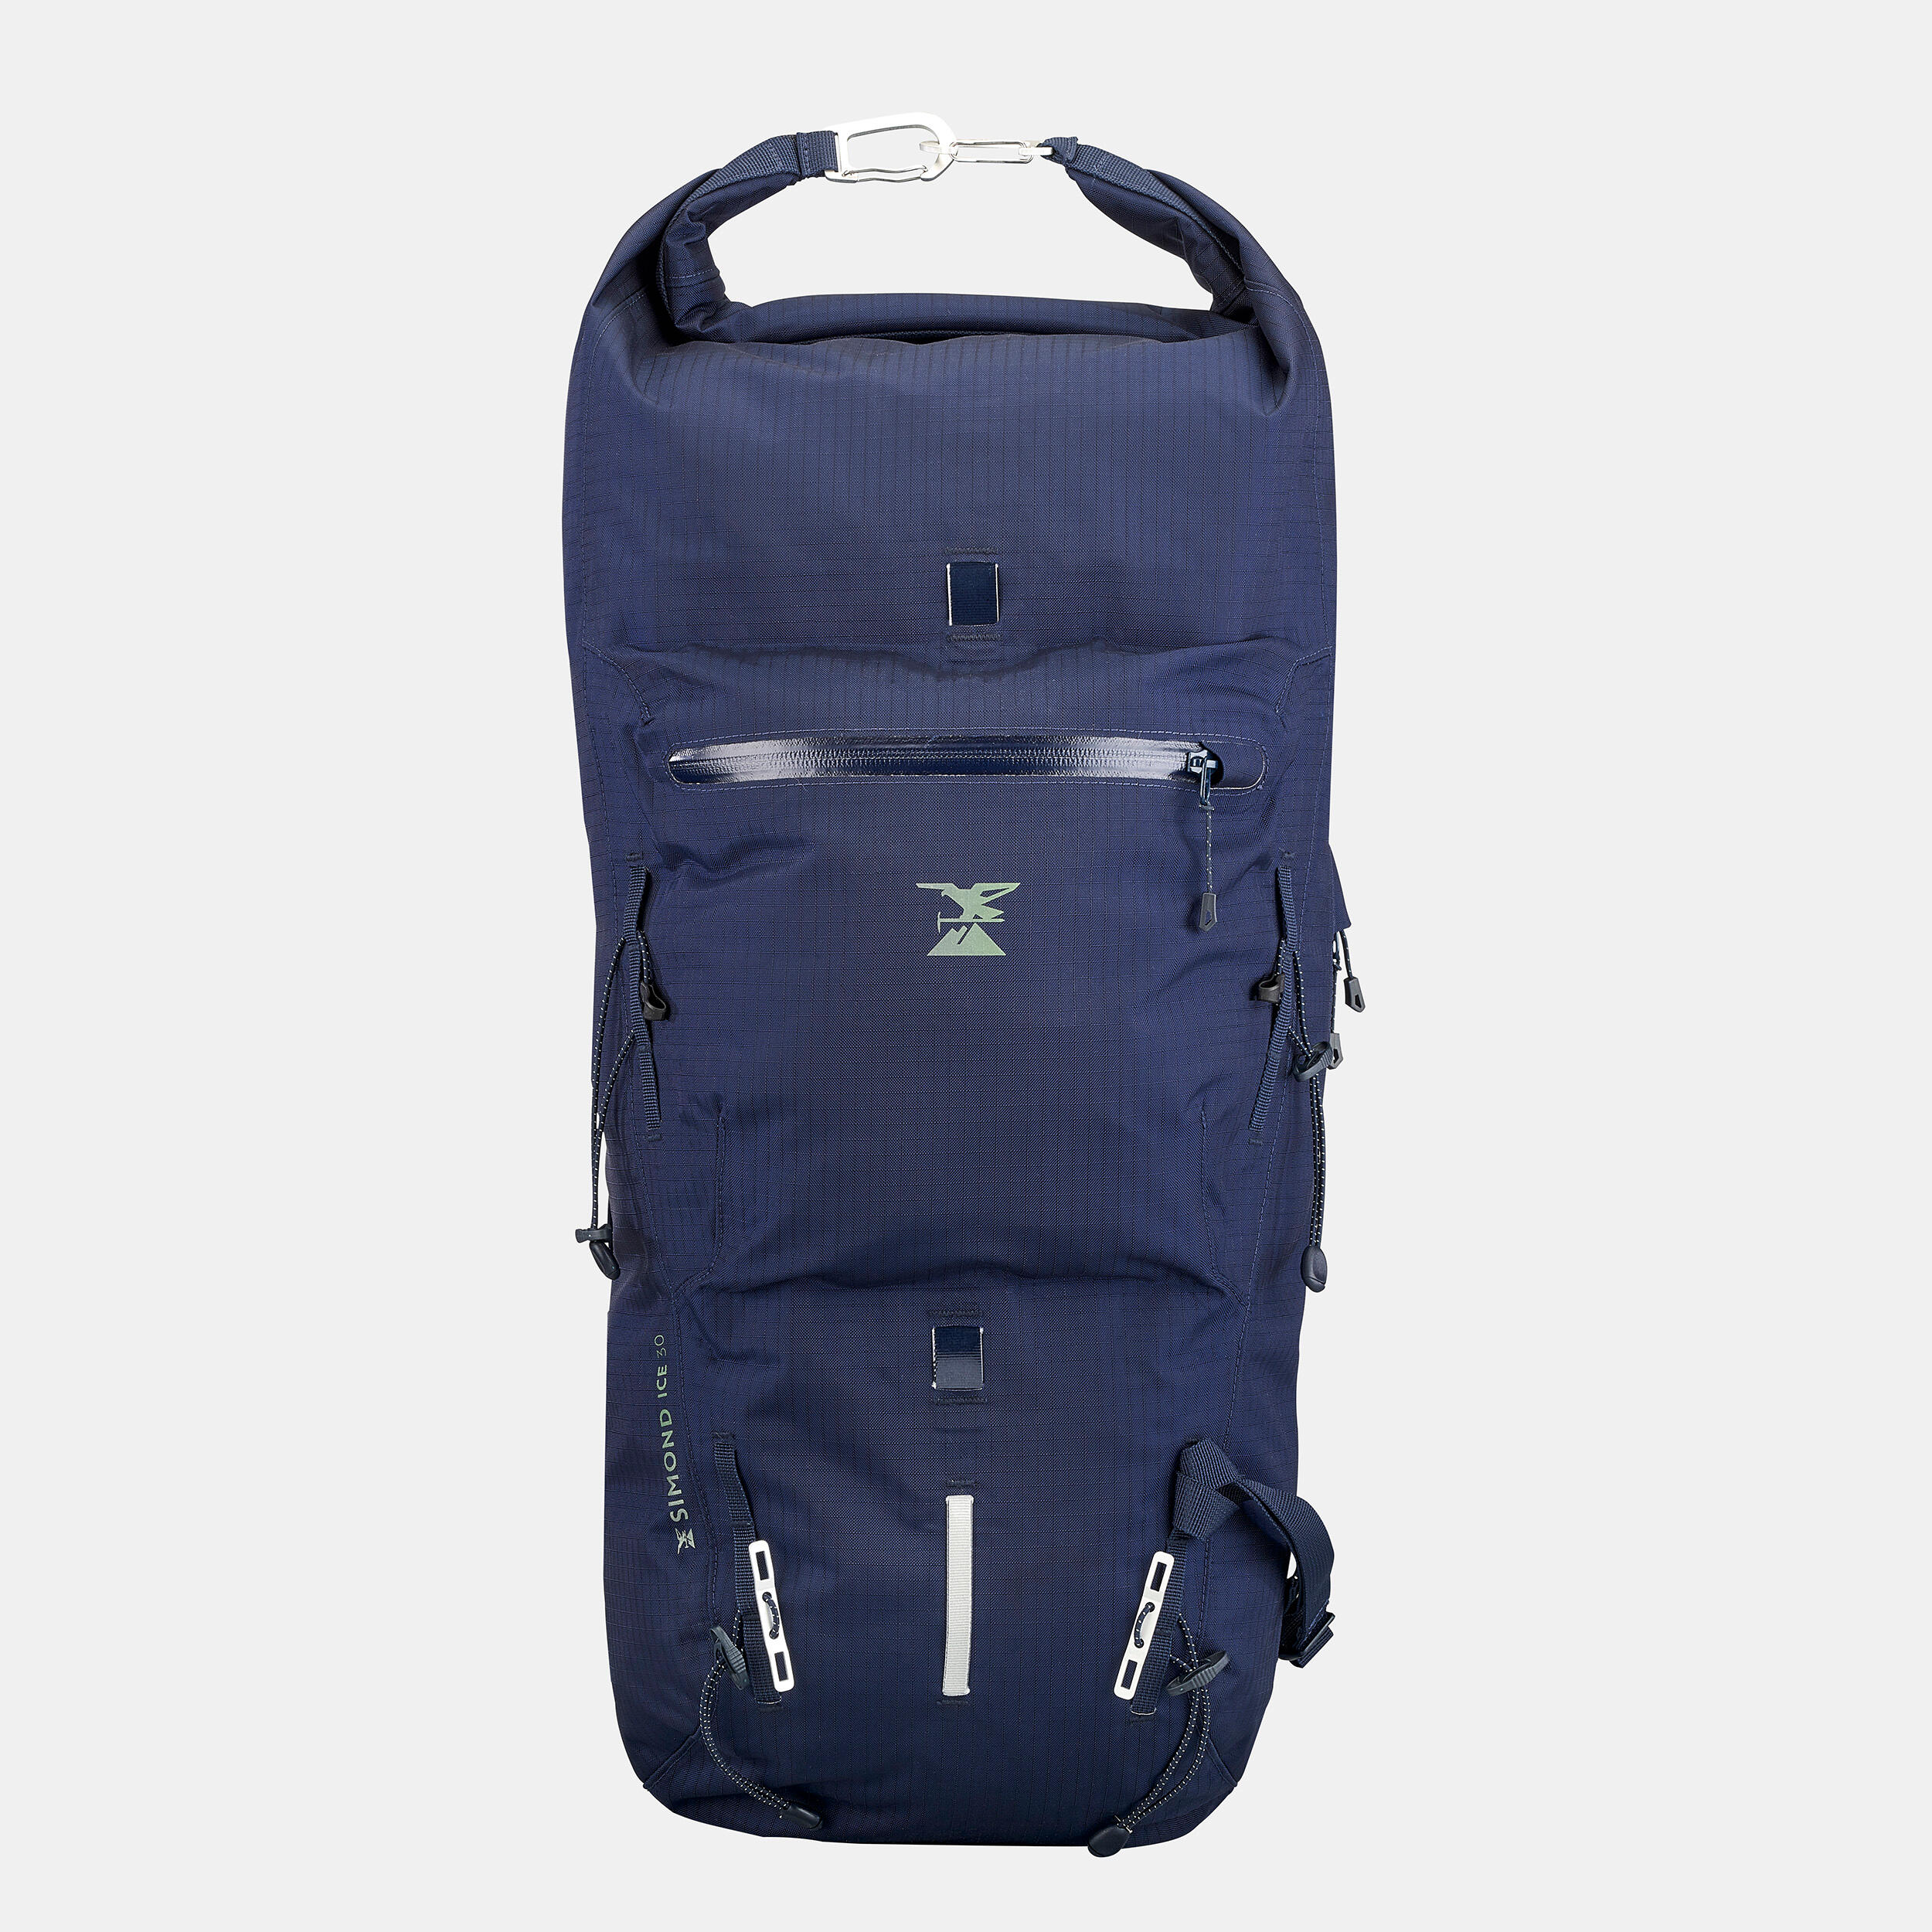 Mountaineering Backpack 30 LITRES - ICE 30 BLUE 4/17